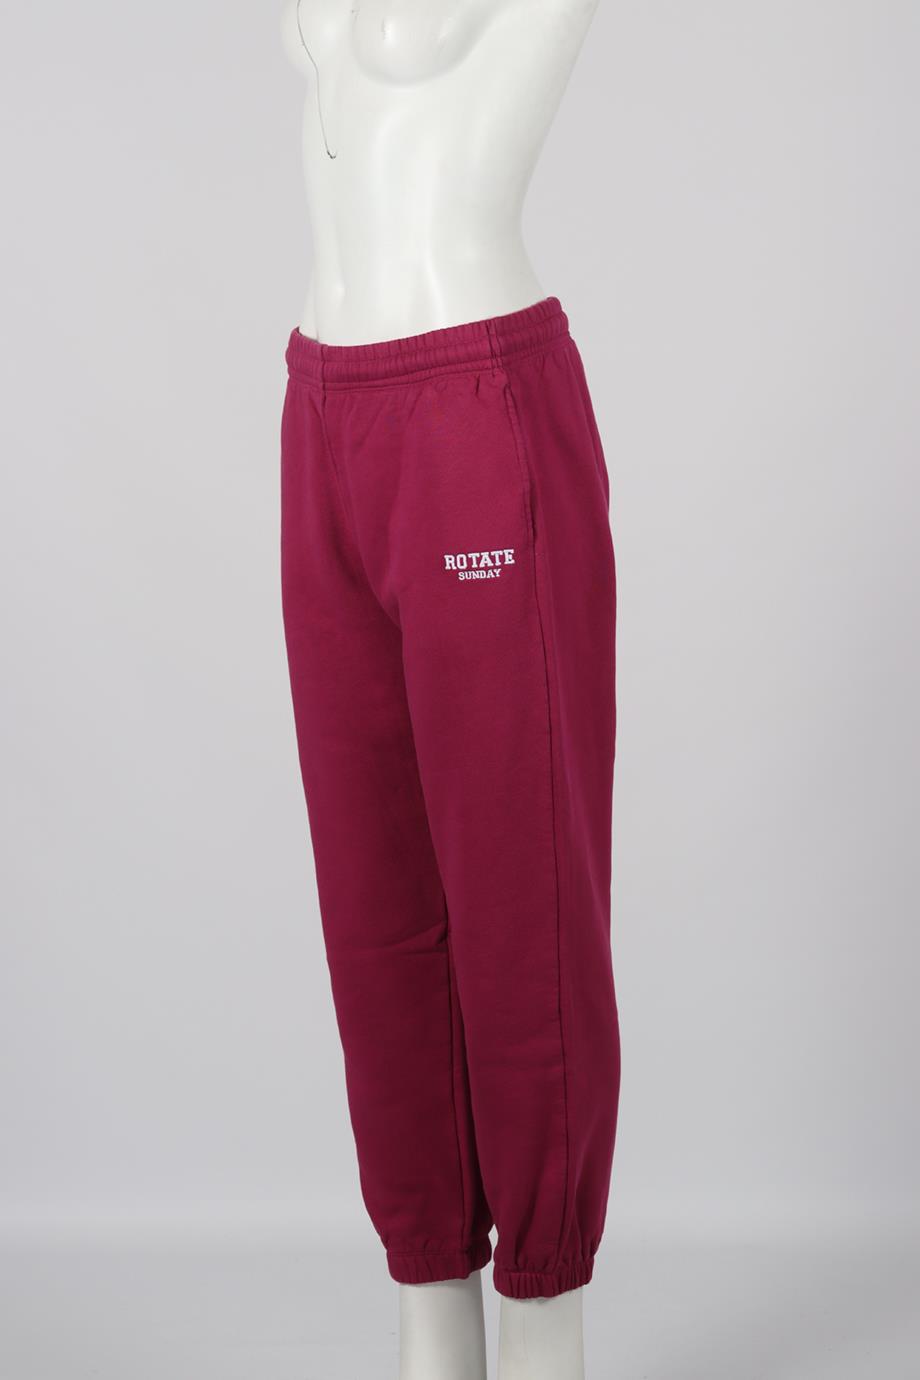 ROTATE BIRGER CHRISTENSEN EMBROIDERED COTTON JERSEY TRACK PANTS SMALL